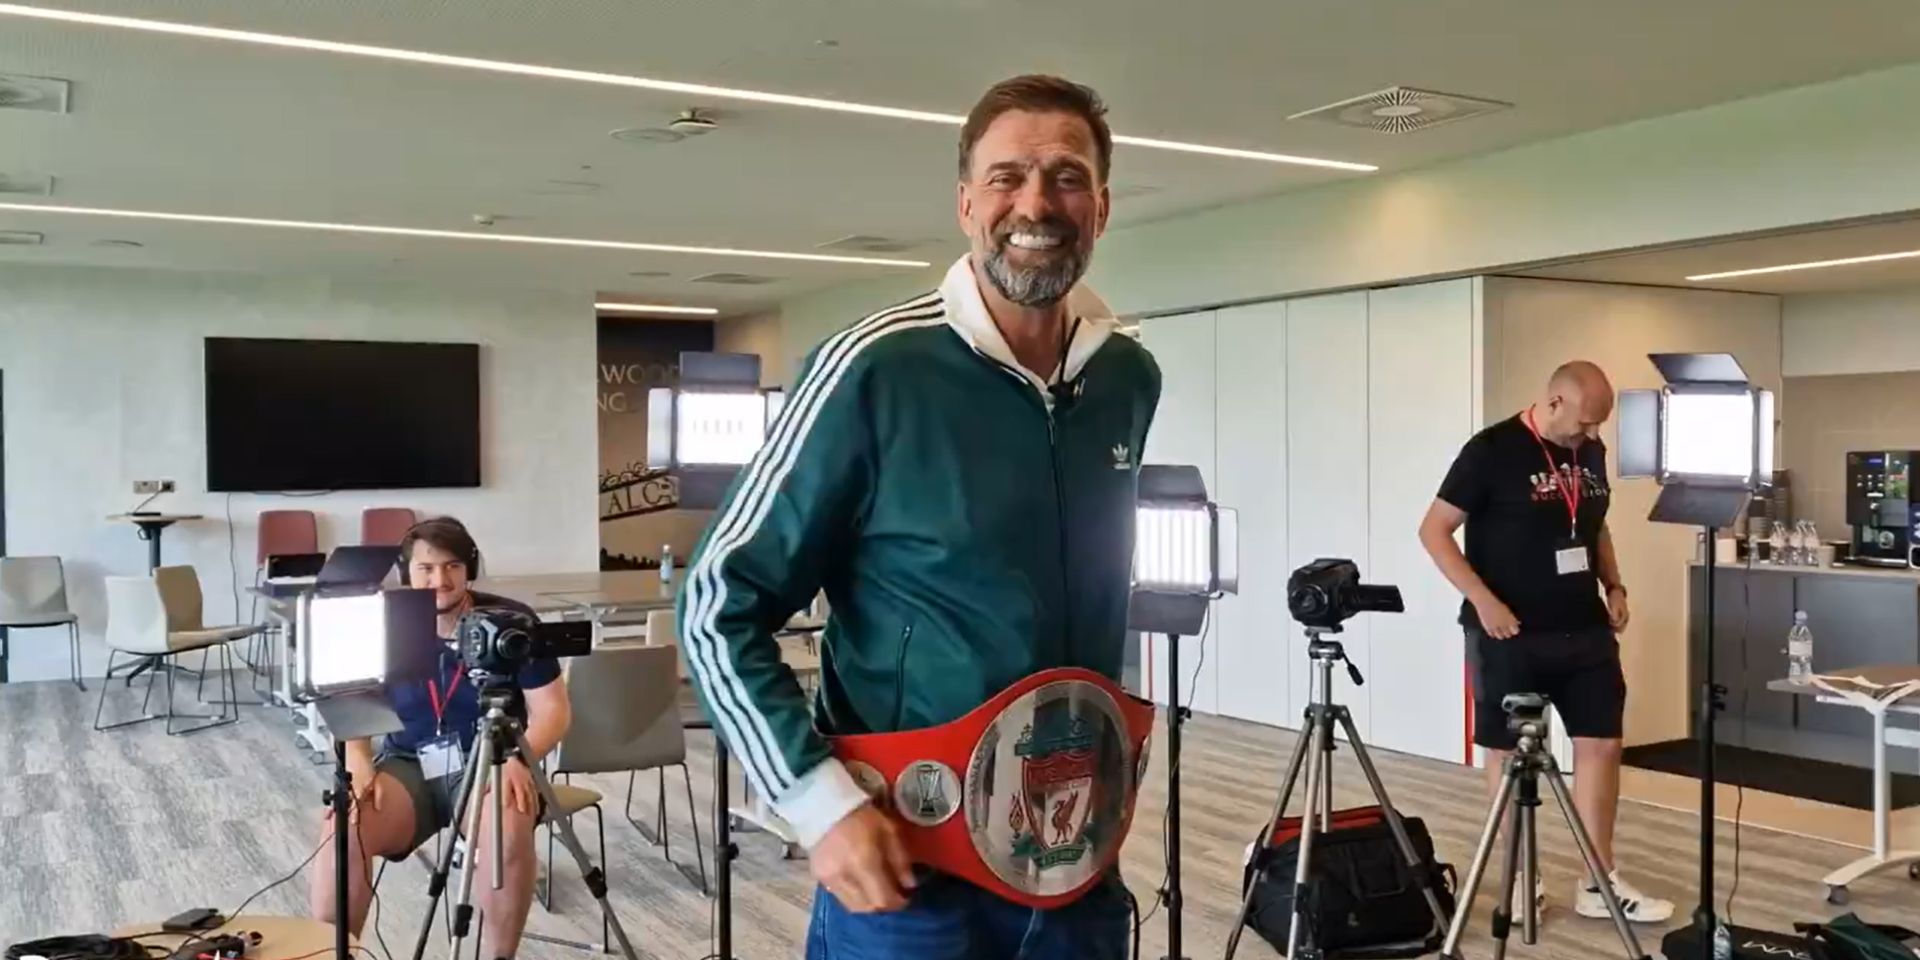 (Video) Liverpool fans will be in creases with Klopp’s reaction to wrestling belt gift